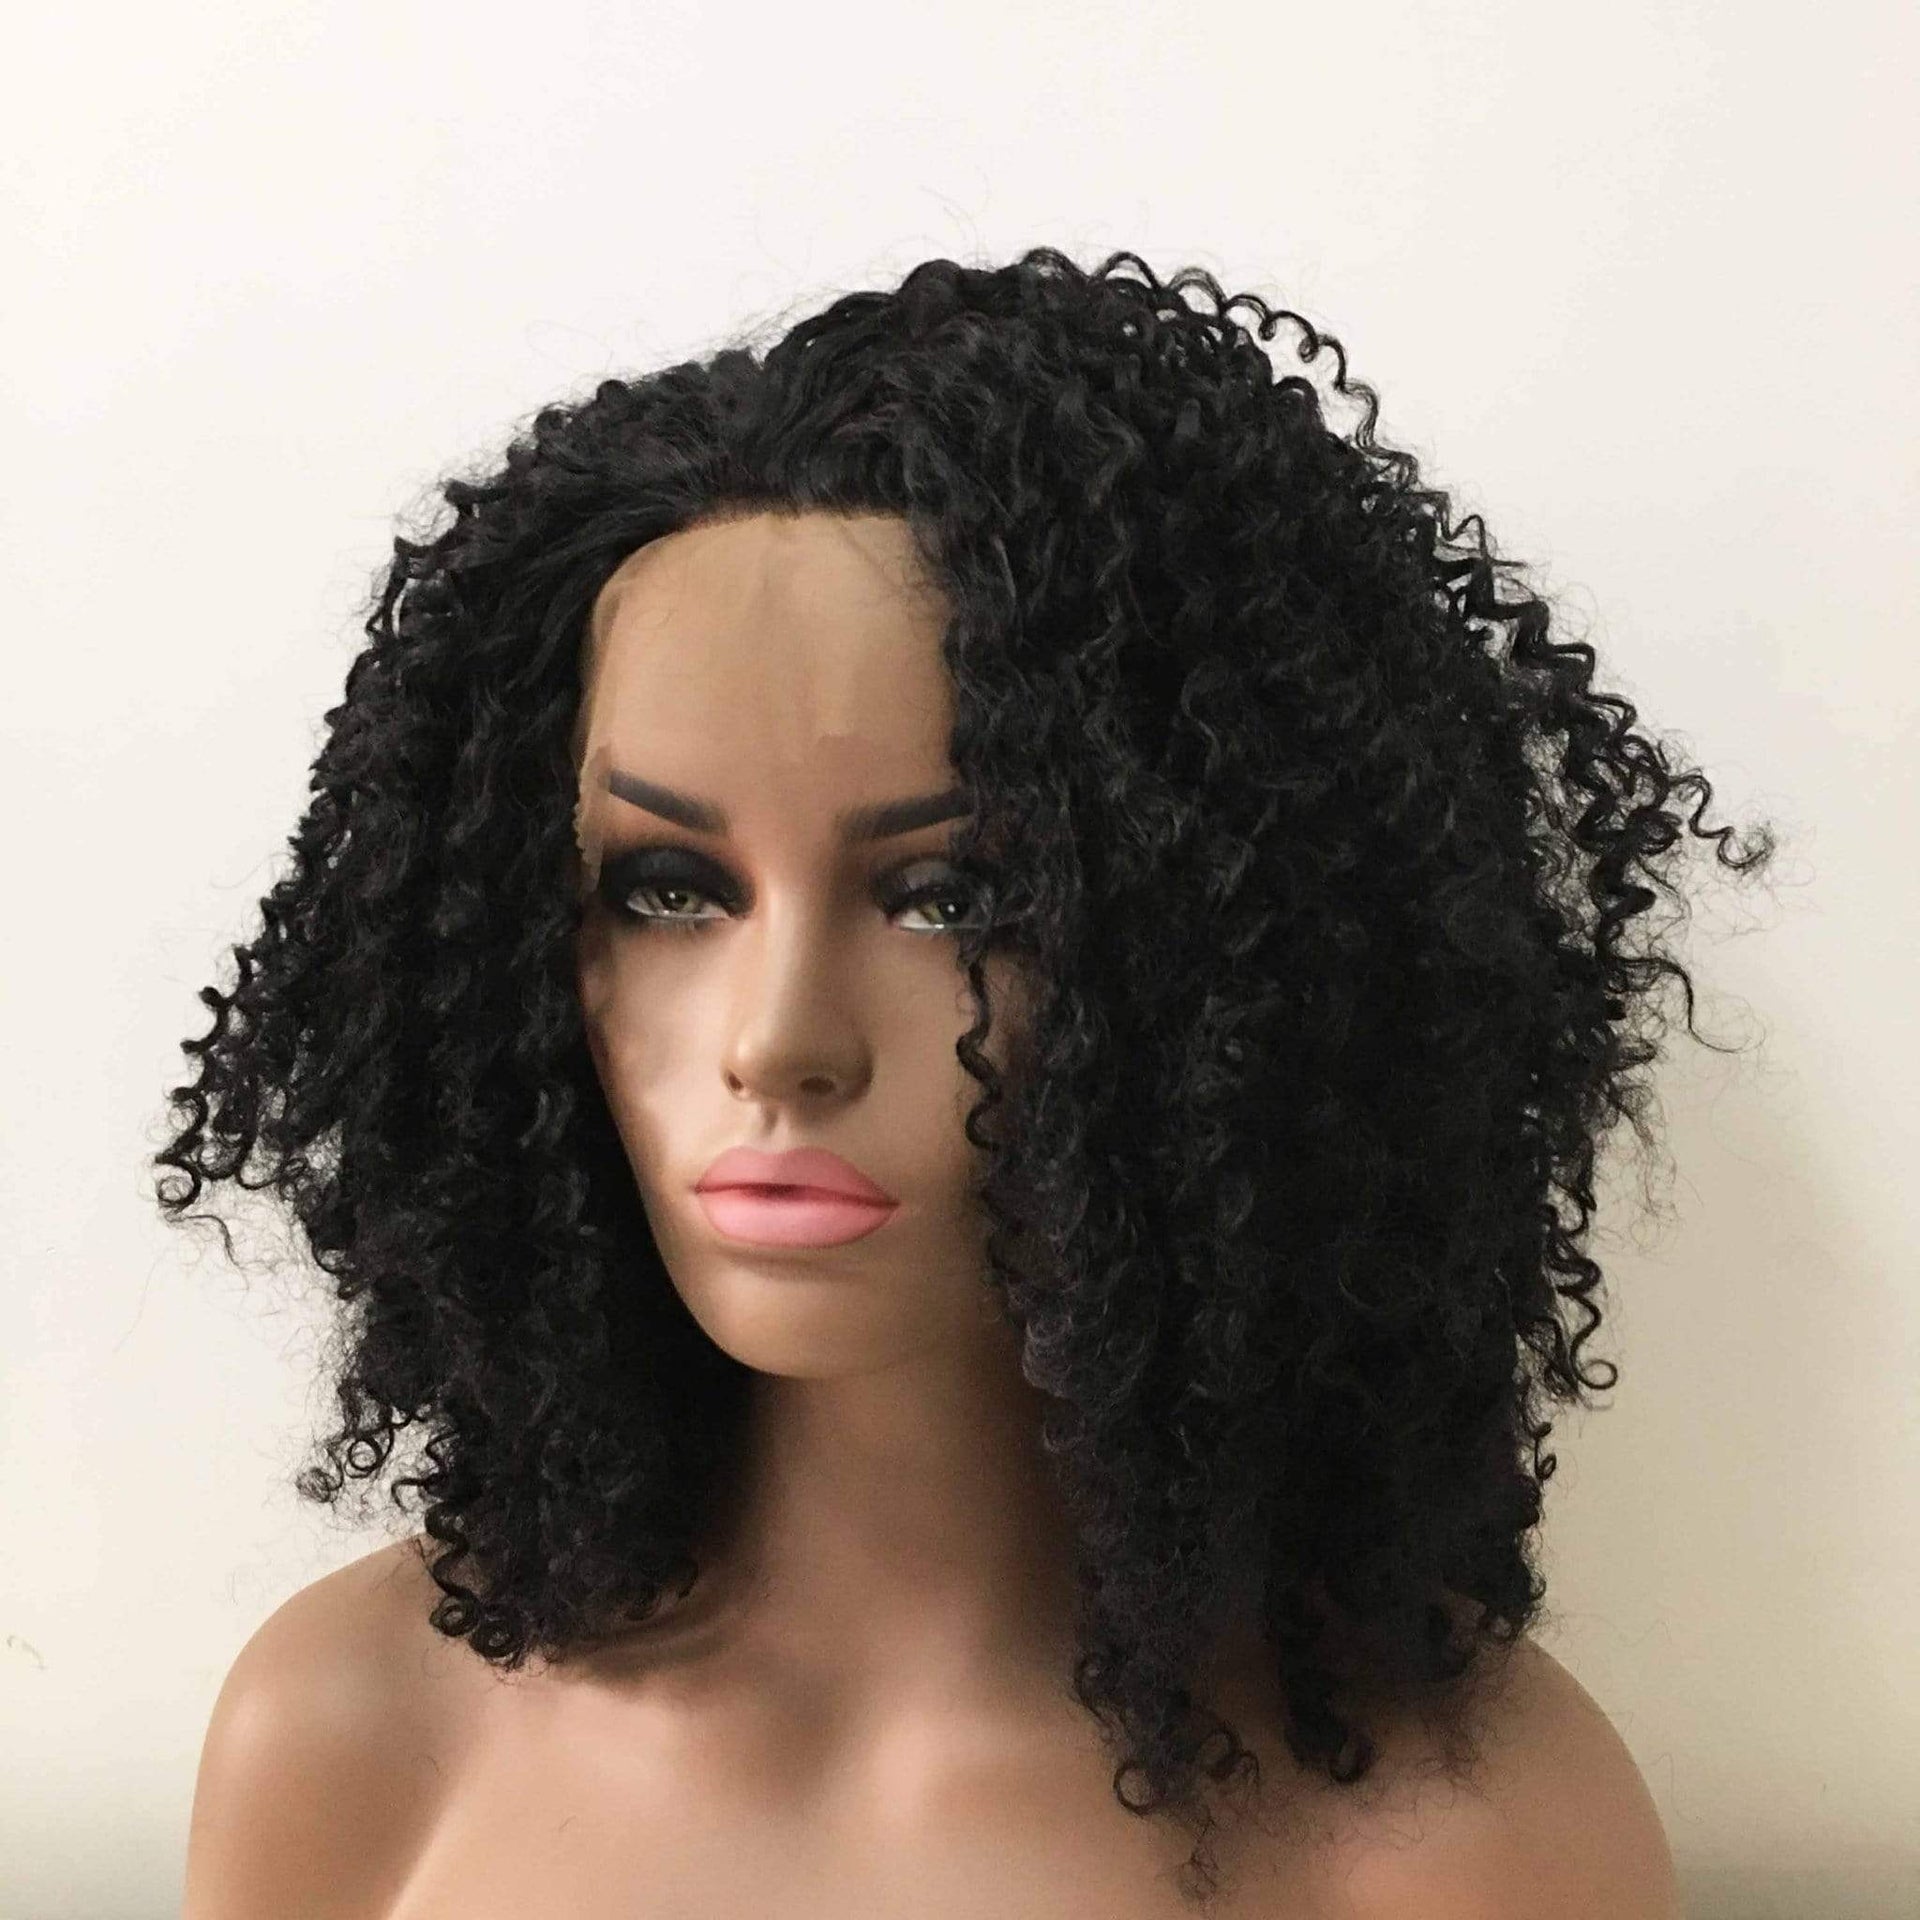 nevermindyrhead Women Black Lace Front Medium Length Kinky Coils Curly Free Part Wig